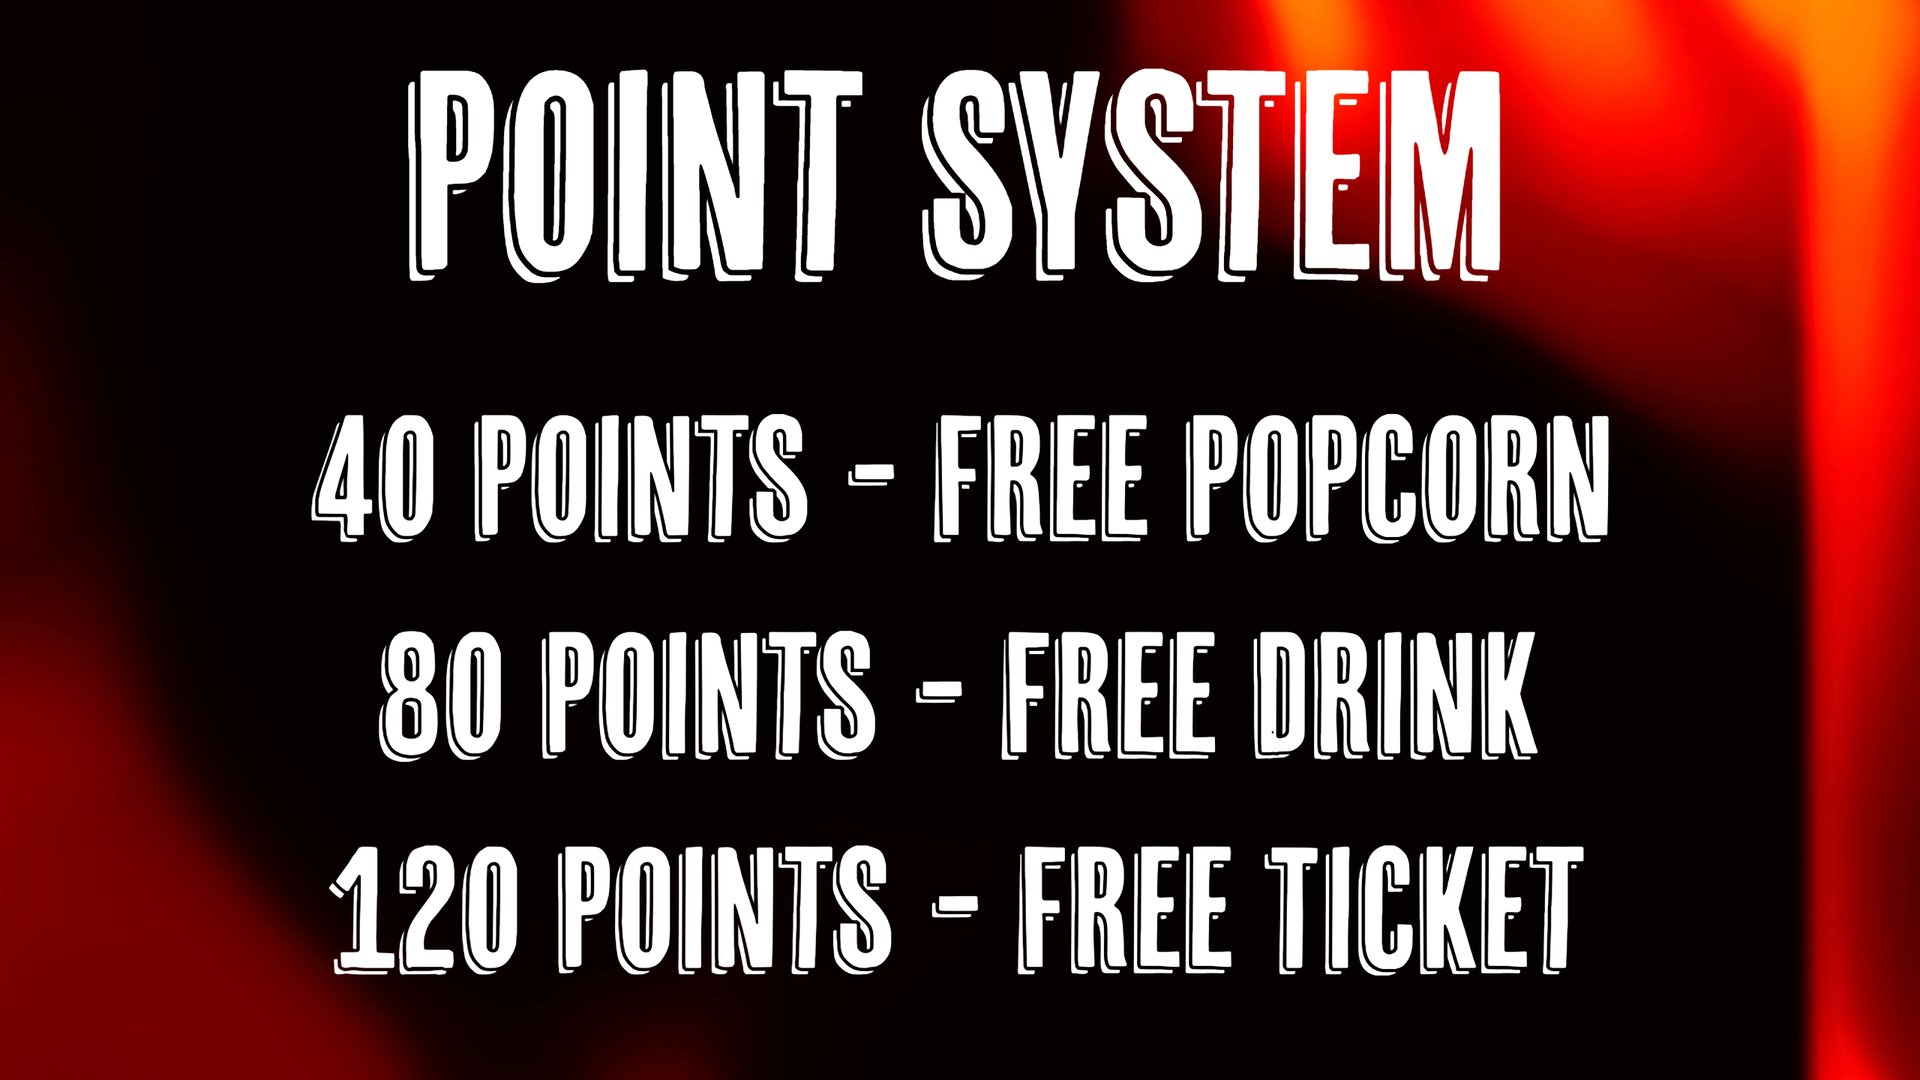 Point system